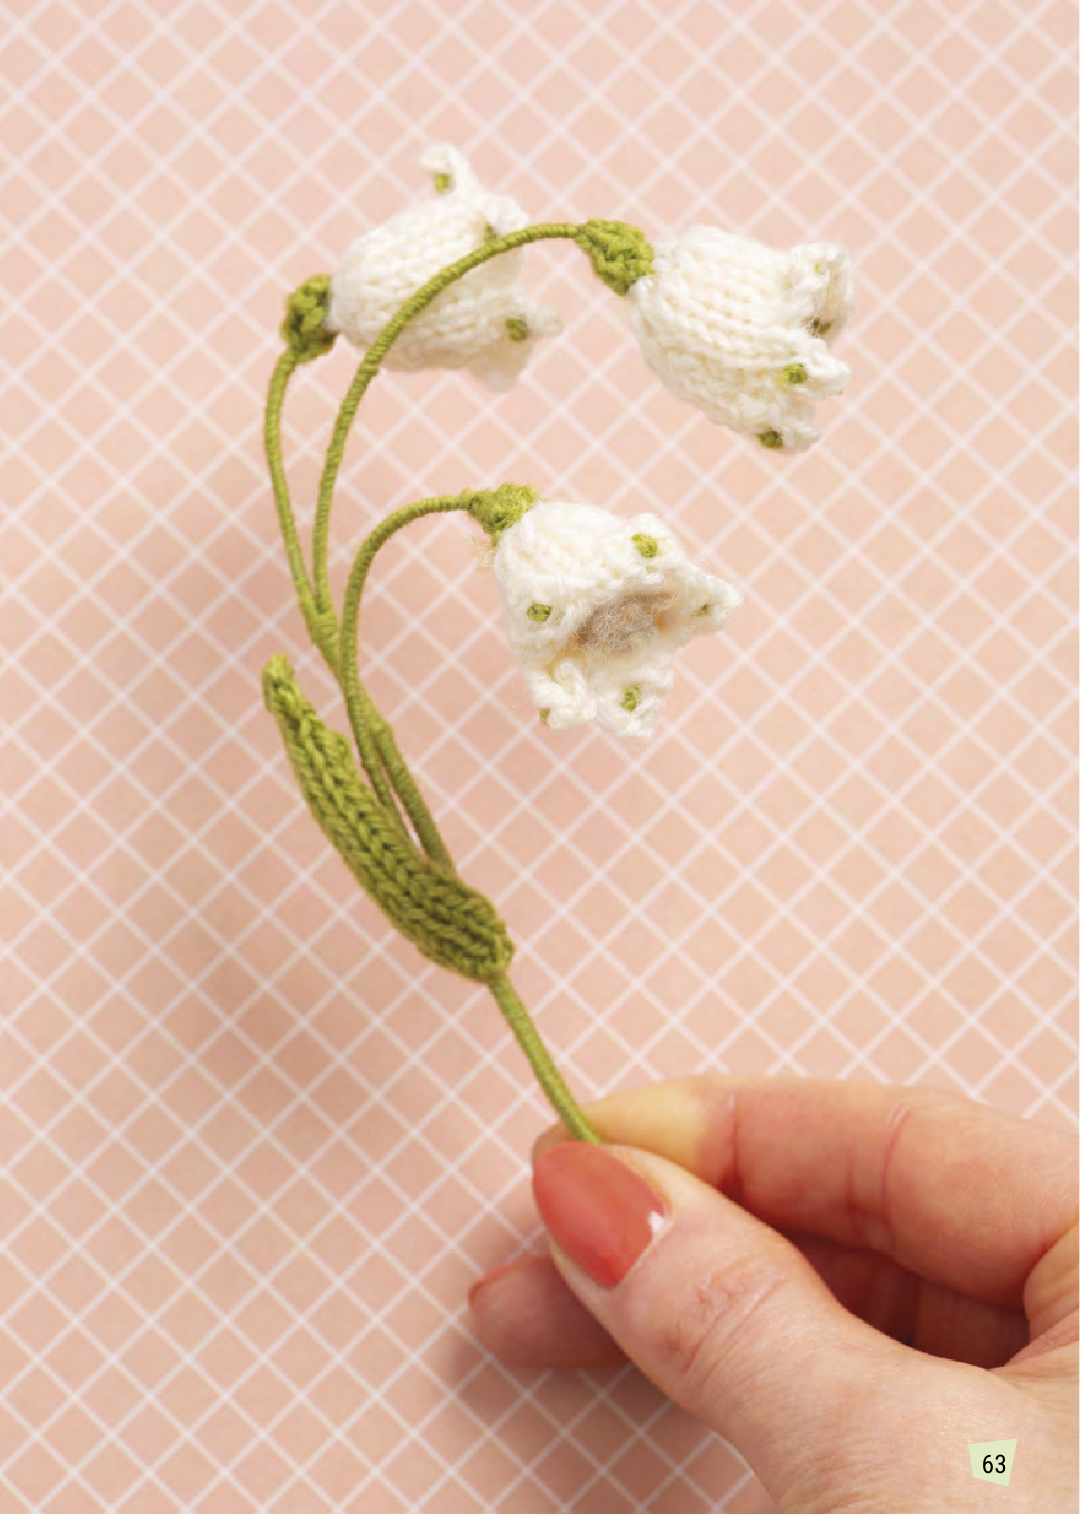 FLOWERS TO KNIT